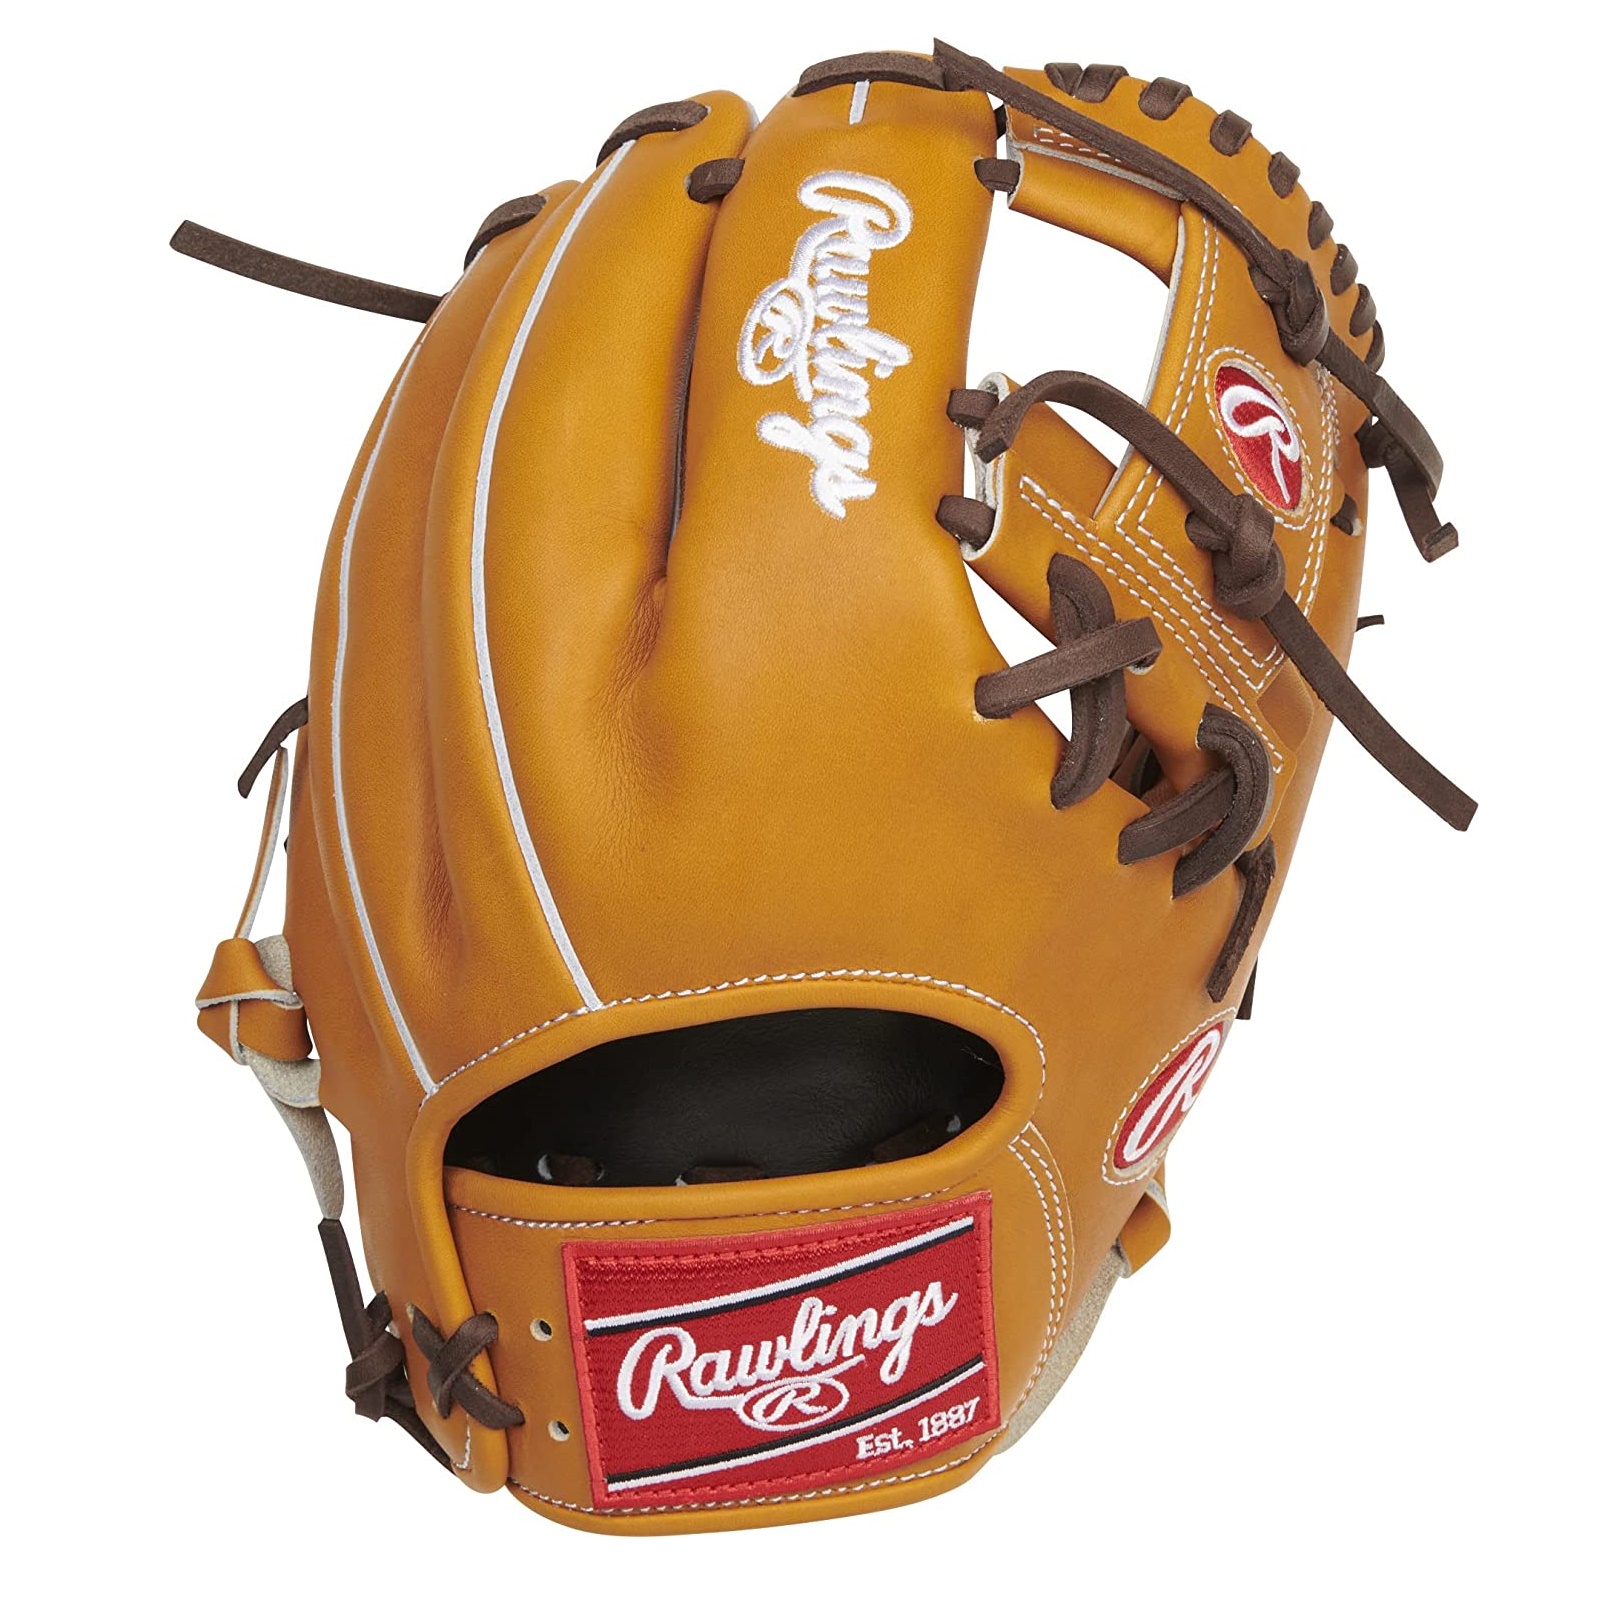 The Heart of the Hide steer leather used in these gloves is meticulously crafted by Rawlings, a company with a long-standing reputation for producing top-quality baseball equipment. Only the best hides are chosen to be used in the construction of Heart of the Hide gloves, ensuring that they are made from the highest-grade leather available. This leather is not only ultra-durable, but it is also known for its ability to break-in and form the perfect pocket, which is essential for catching the ball with precision and accuracy. Furthermore, the Heart of the Hide leather is cut from the top 5% of all Rawlings US steer hide, meaning that it is of the highest quality and structure. This ensures that the gloves are not only durable, but also provide a comfortable fit and optimal performance. By choosing a Heart of the Hide glove, you are investing in a piece of equipment that is trusted by many of the game's top pros and is sure to help you take your game to the next level. The 11.50 Inch Pattern glove is designed specifically for infielders, making it perfect for players at second base, shortstop, and third base positions. However, it's important to note that this glove has a stiffer feel, which will require a break-in period of about 60% of the break-in to be done by the player. This will ensure that the glove fits comfortably and performs optimally on the field. The Pro I-Web design and 204 pattern, which is the most popular pro infield pattern, provides a deep pocket and standard palm width, closing the thumb to the 4th finger and pinky. The glove is constructed from top-grade U.S. steerhide and features a deer tanned cowhide palm lining and soft full-grain fingerback linings to improve comfort. The colorway of this glove is tan and it has a conventional open back design. It also includes a padded thumb sleeve, pro-grade leather laces that add durability and strength, and thermoformed padding for the back of the wrist for added comfort when the glove is in use.